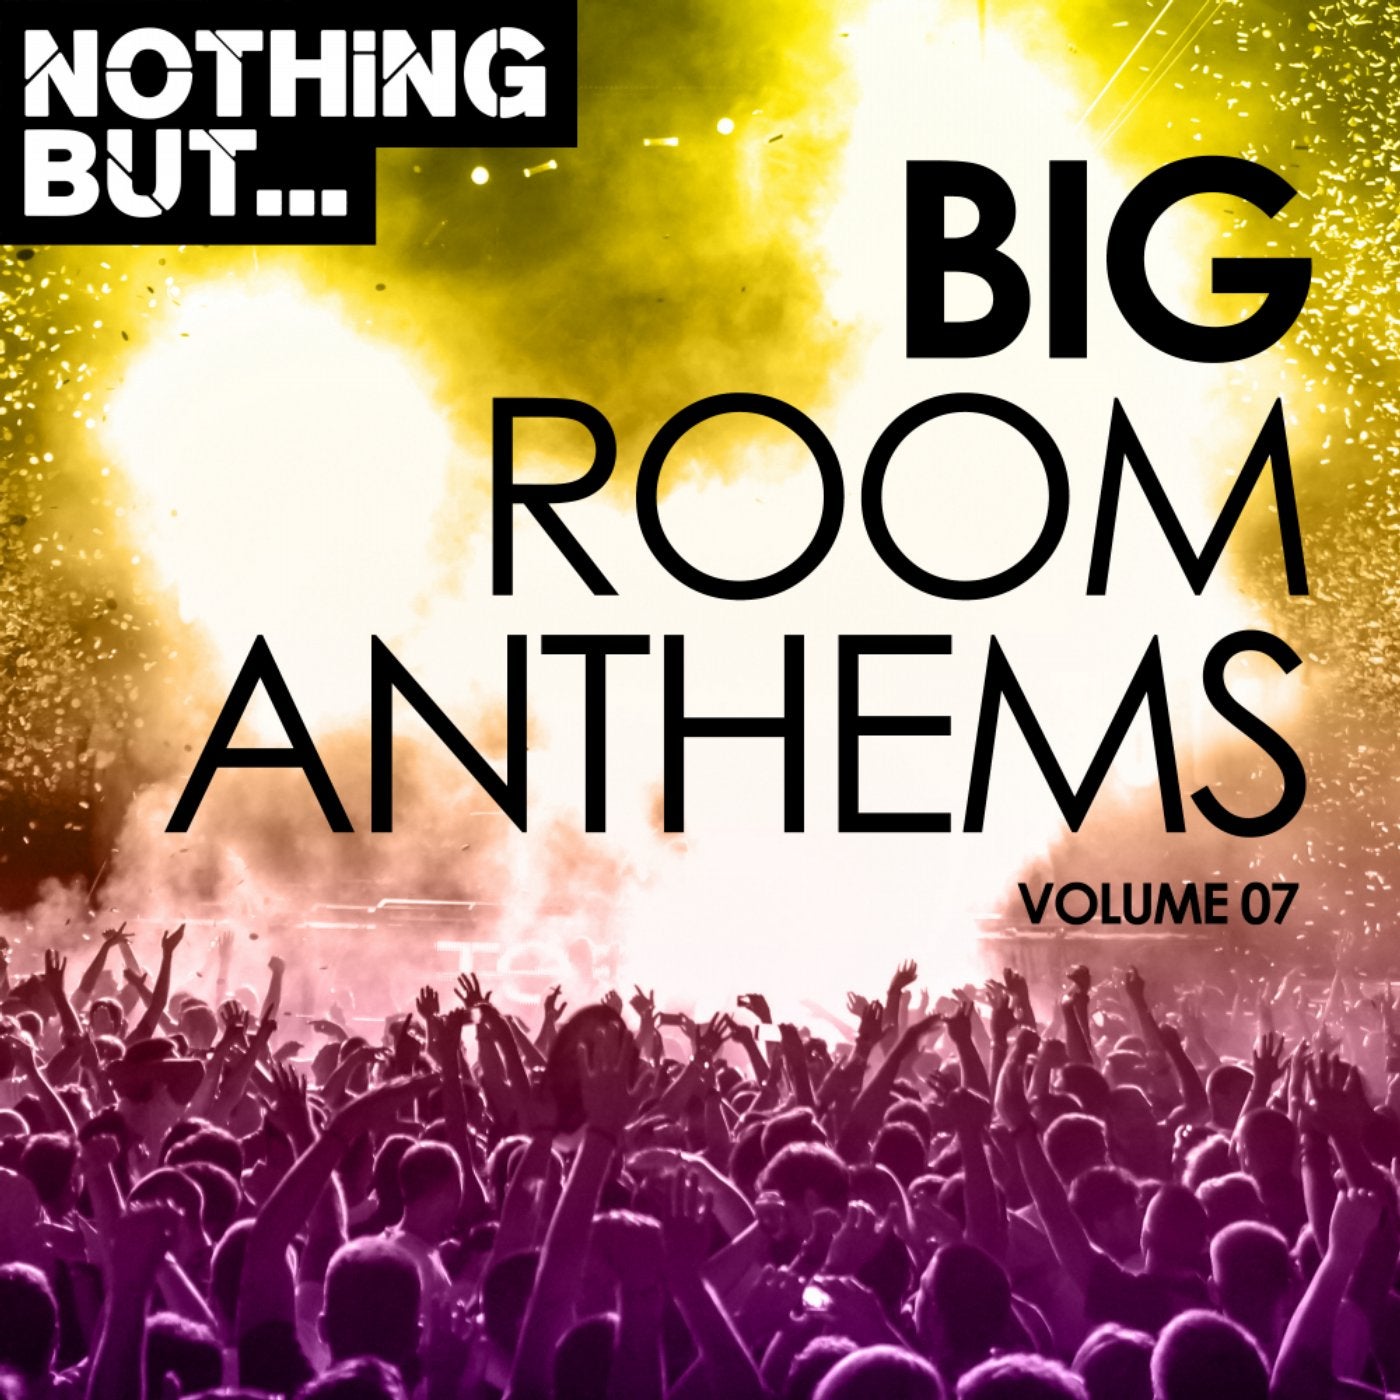 Nothing But... Big Room Anthems, Vol. 07